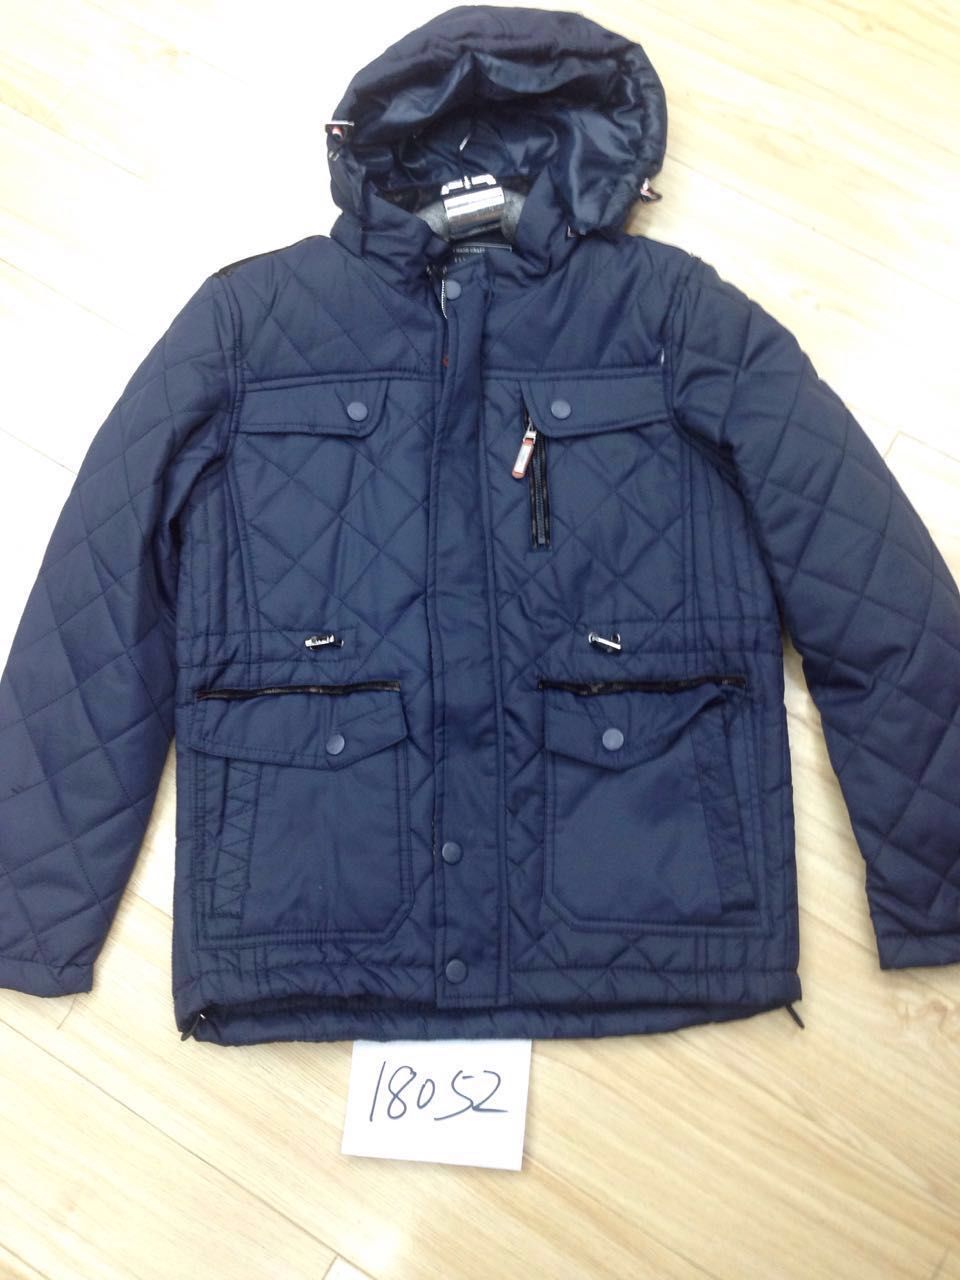 man quilted jacket 18052